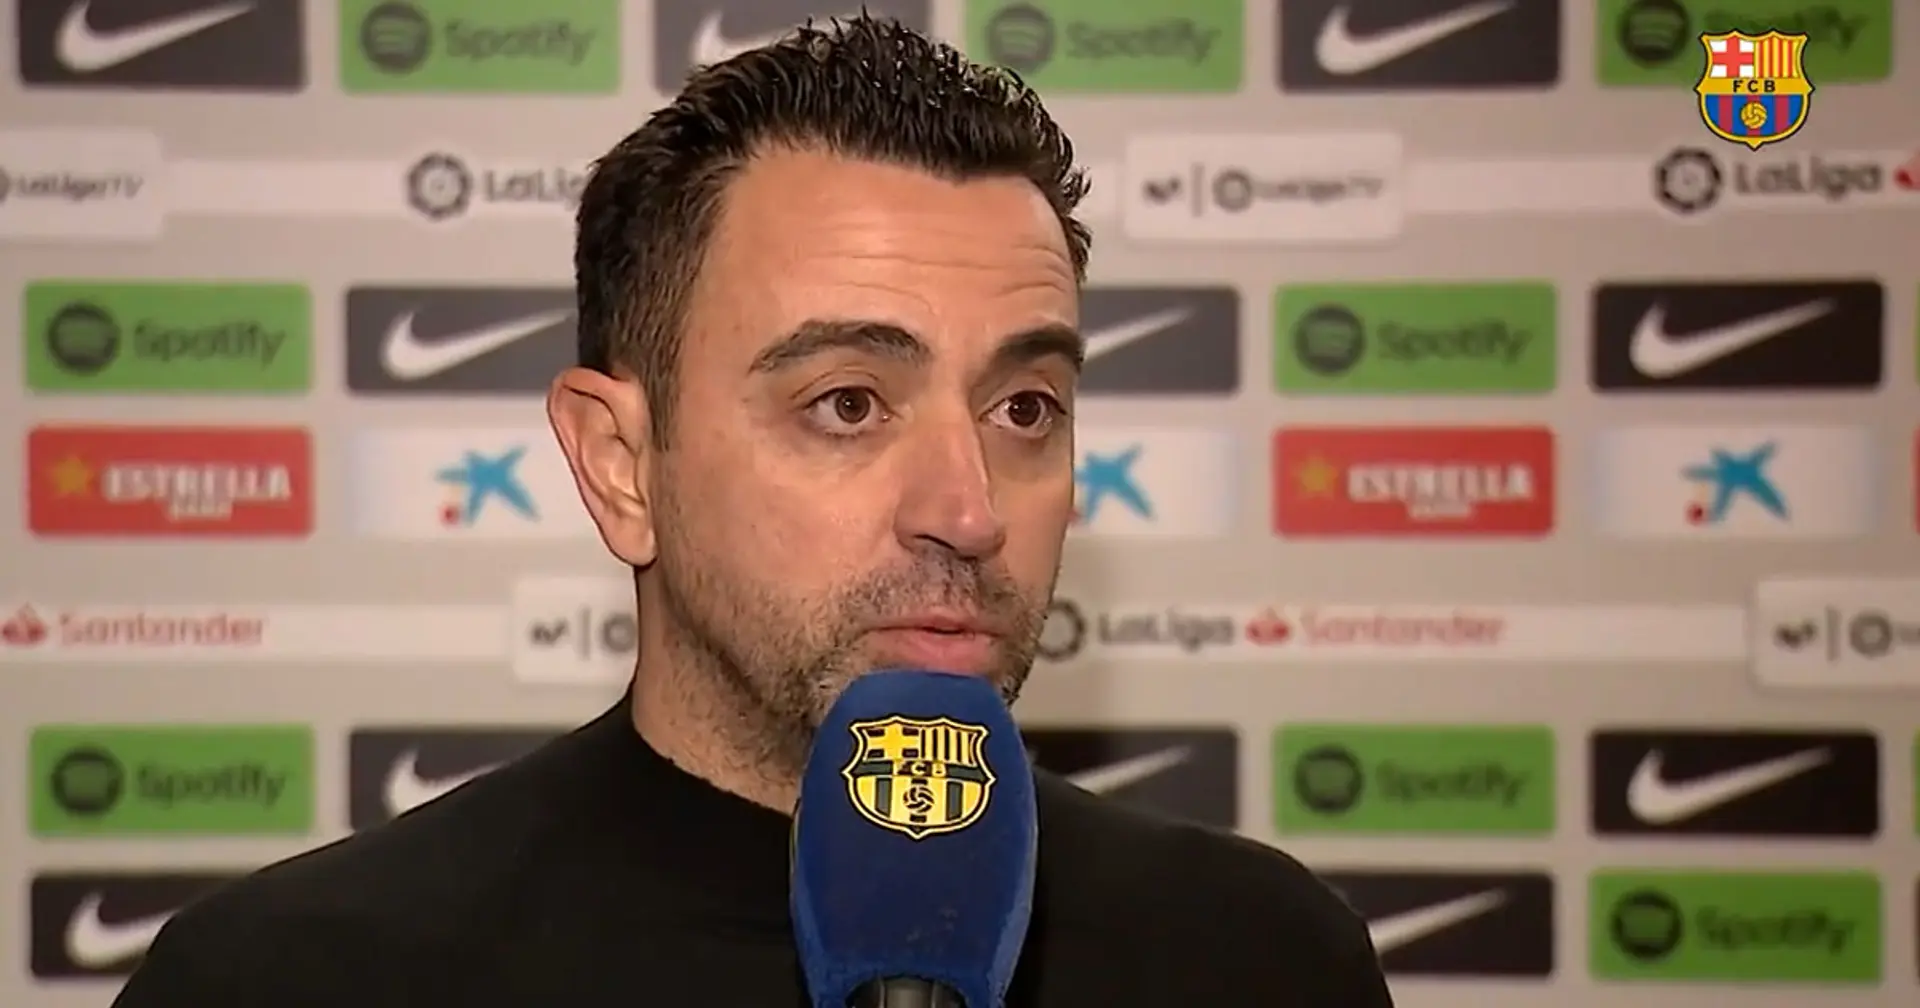 '70% of our matches have been better': Xavi unhappy with Getafe performance